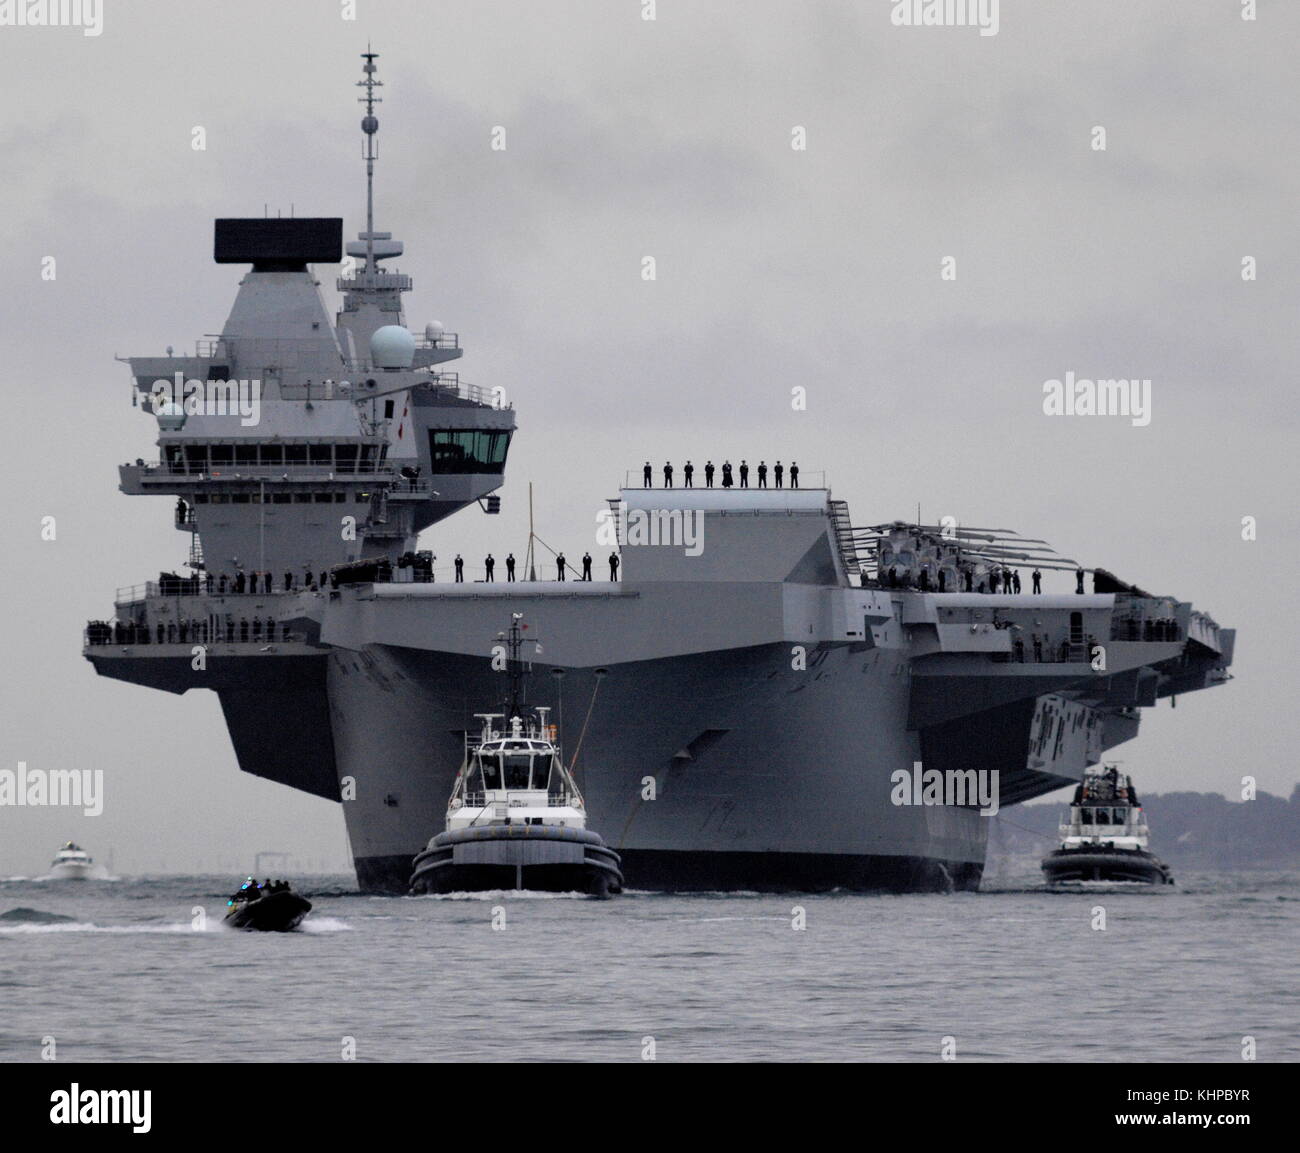 AJAXNETPHOTO. 16TH AUGUST, 2017. PORTSMOUTH, ENGLAND. - ROYAL NAVY'S BIGGEST WARSHIP SAILS INTO HOME PORT - HMS QUEEN ELIZABTH, THE FIRST OF TWO 65,000 TONNE, 900 FT LONG, STATE-OF-THE-ART AIRCRAFT CARRIERS SAILED INTO PORTSMOUTH NAVAL BASE IN THE EARLY HOURS OF THIS MORNING, GENTLY PUSHED AND SHOVED BY SIX TUGS INTO HER NEW BERTH ON PRINCESS ROYAL JETTY. THE £3BN CARRIER, THE LARGEST WARSHIP EVER BUILT FOR THE ROYAL NAVY, ARRIVED AT ARRIVED AT HER HOME PORT TWO DAYS AHEAD OF HER ORIGINAL SCHEDULE.  PHOTO: JONATHAN EASTLAND/AJAX  REF: D171608 6764 Stock Photo